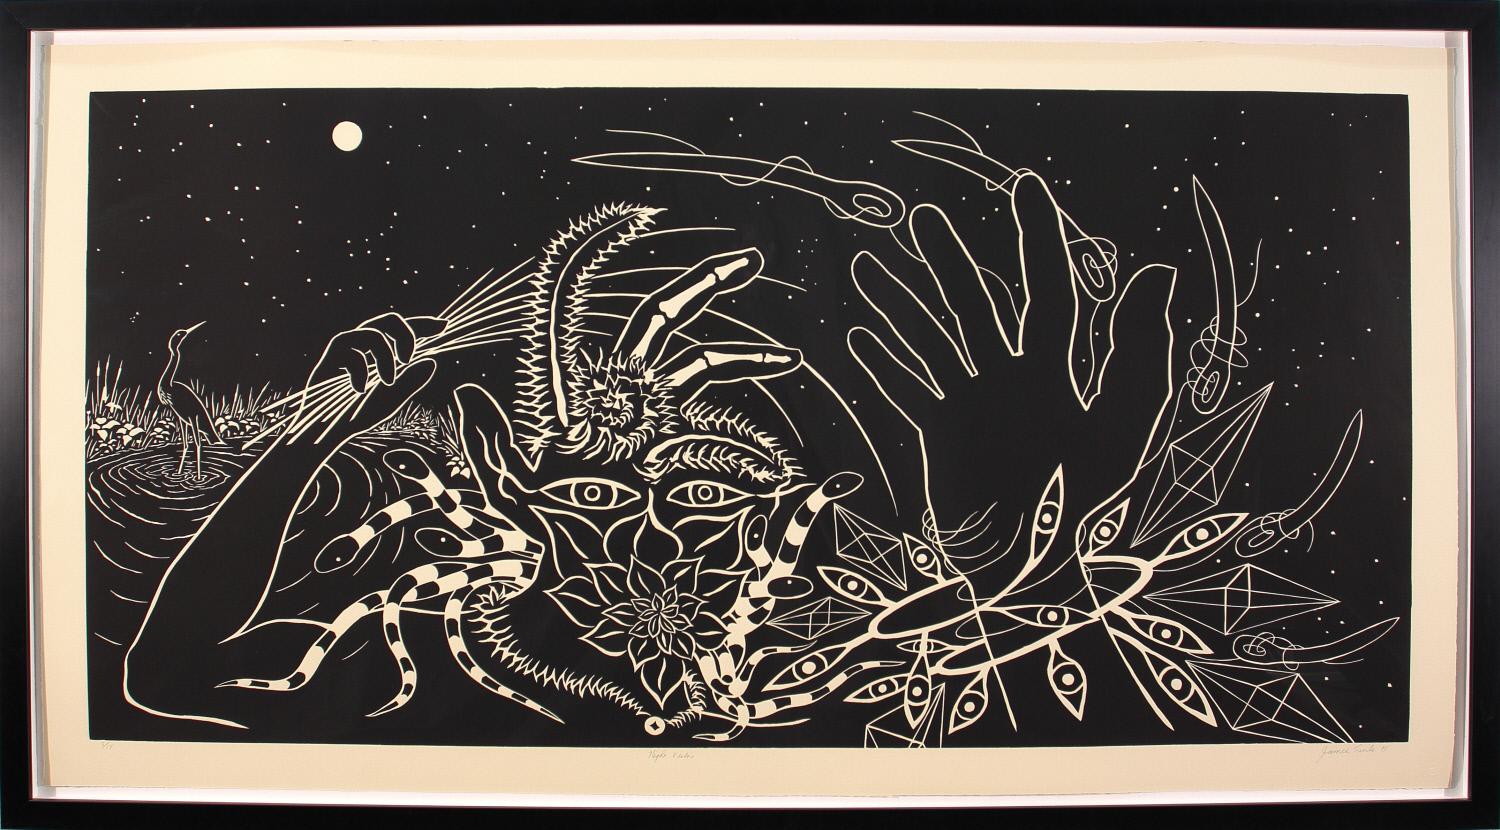 Linocut illustration of a person's face and hands with twisting snakes, eyes, flowers, and diamonds. To the side is a heron in water and the background is the night sky.